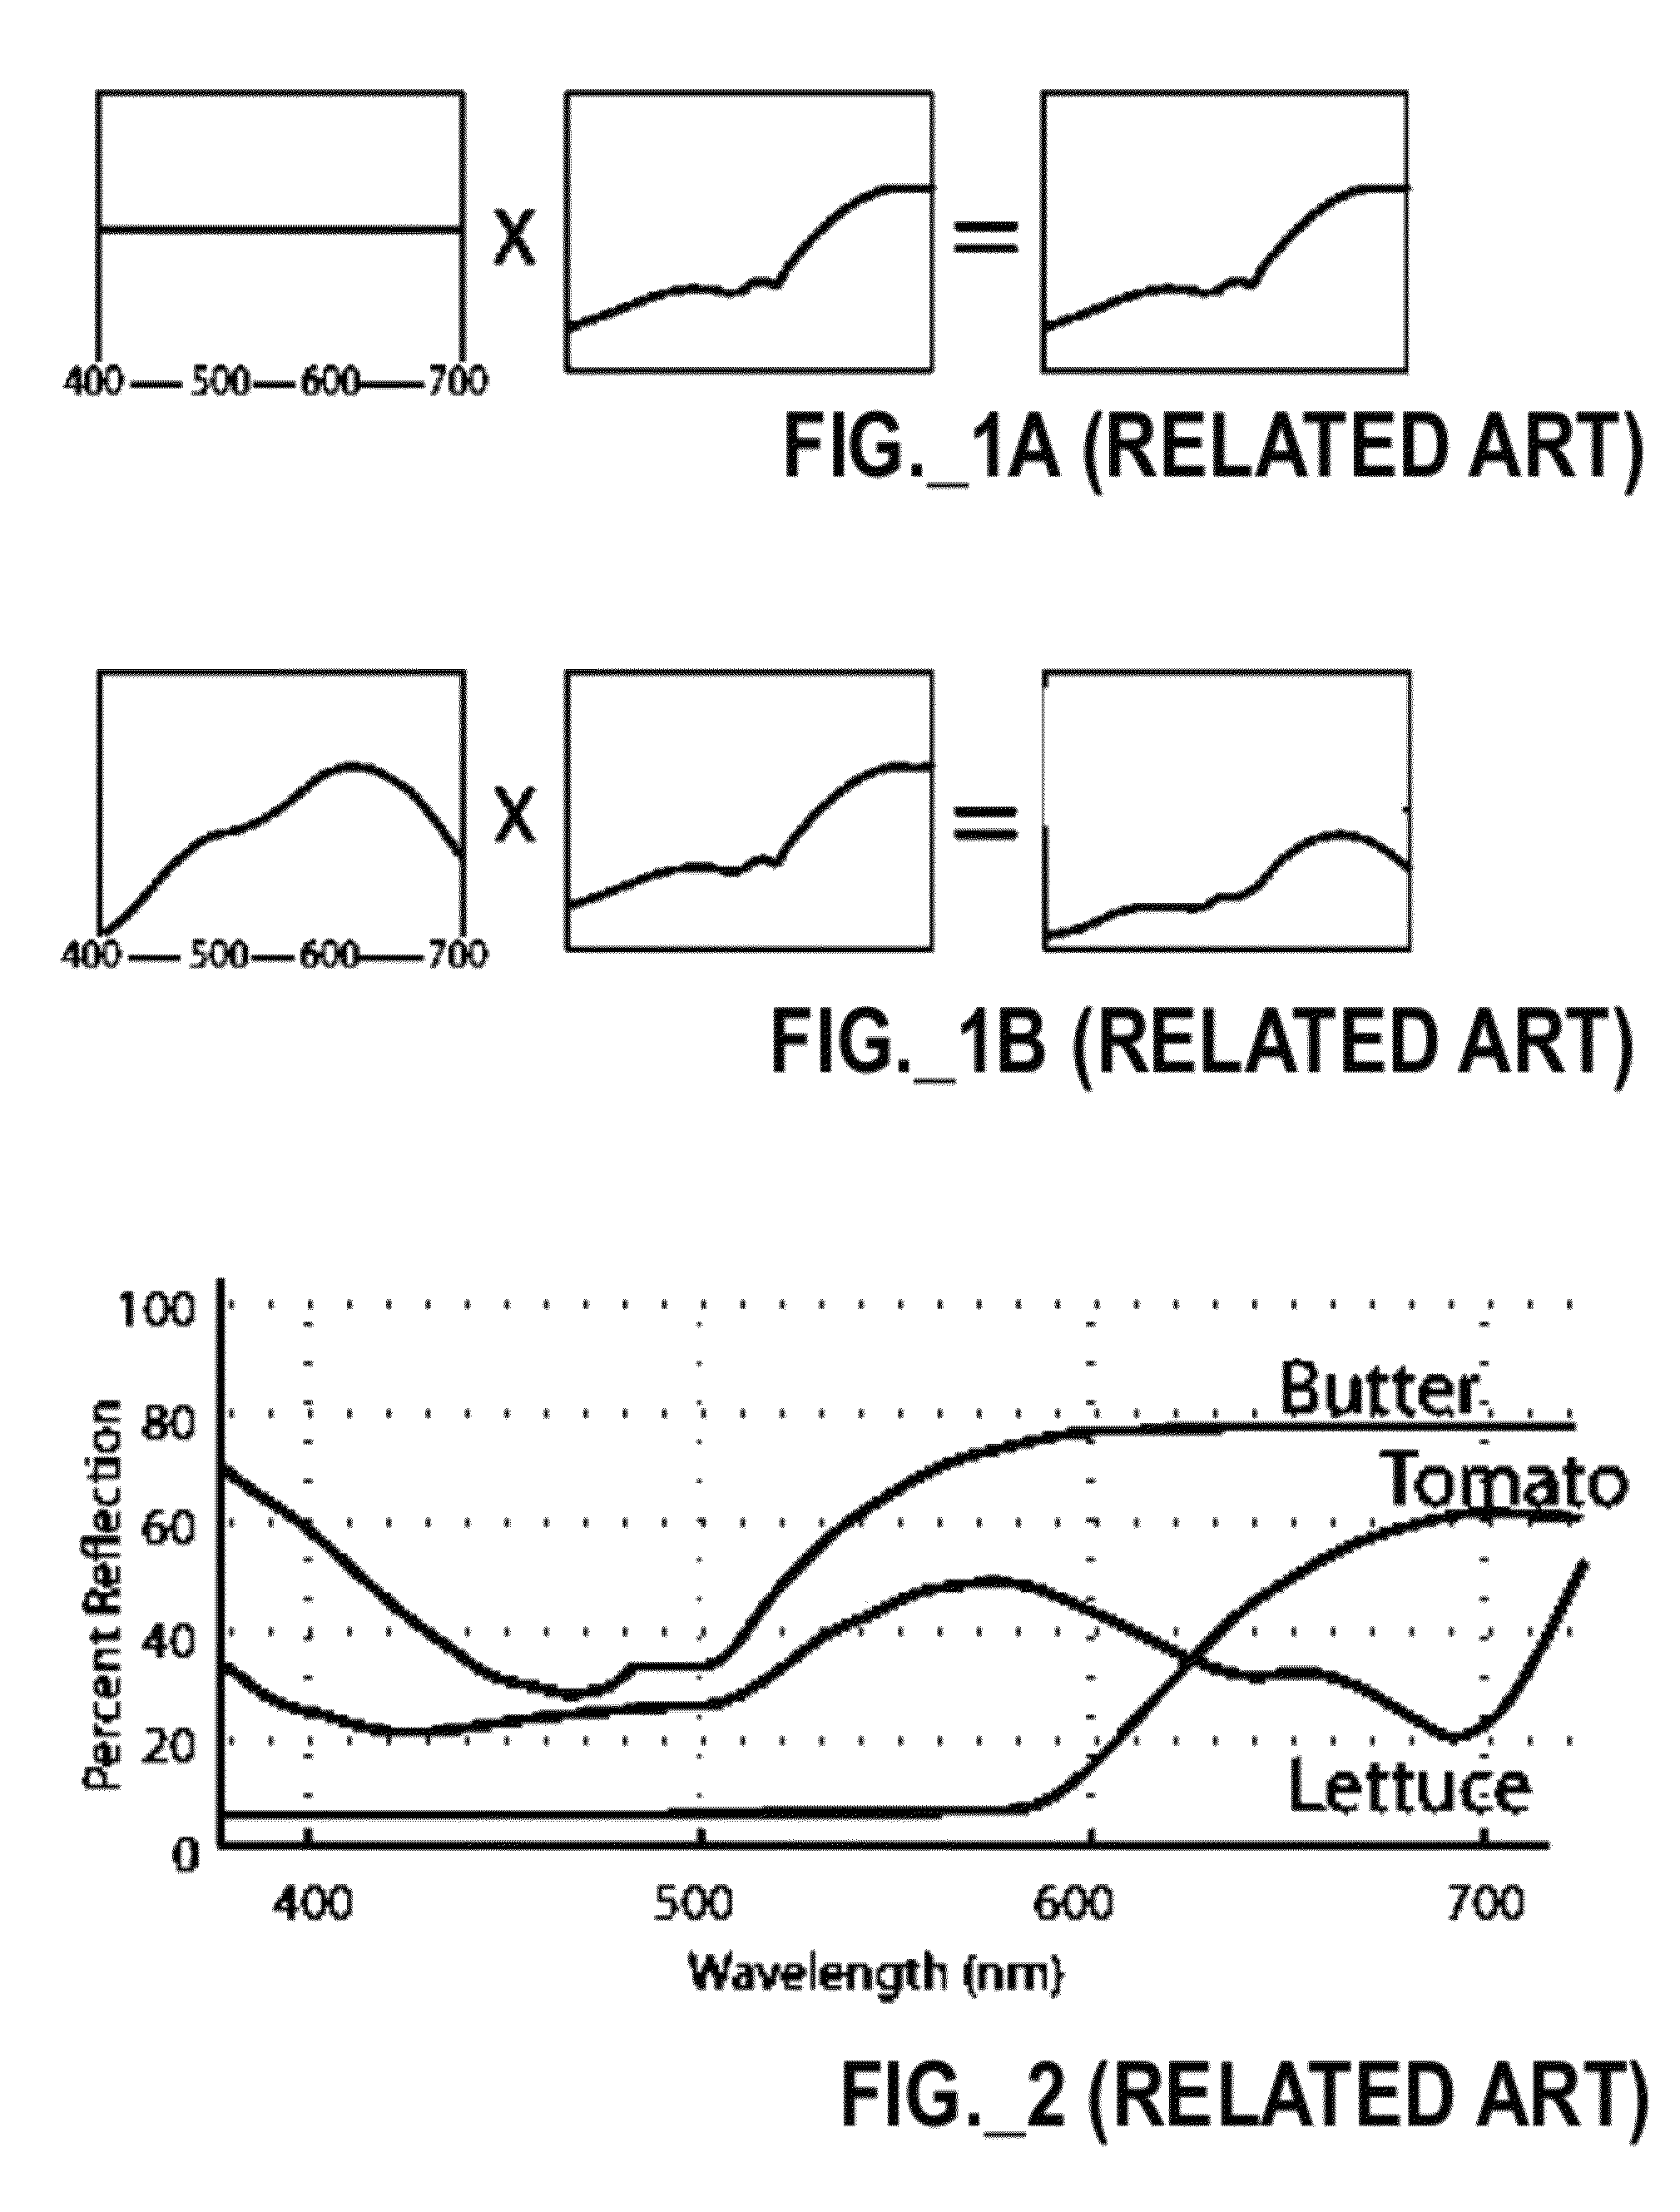 Lighting device with defined spectral power distribution